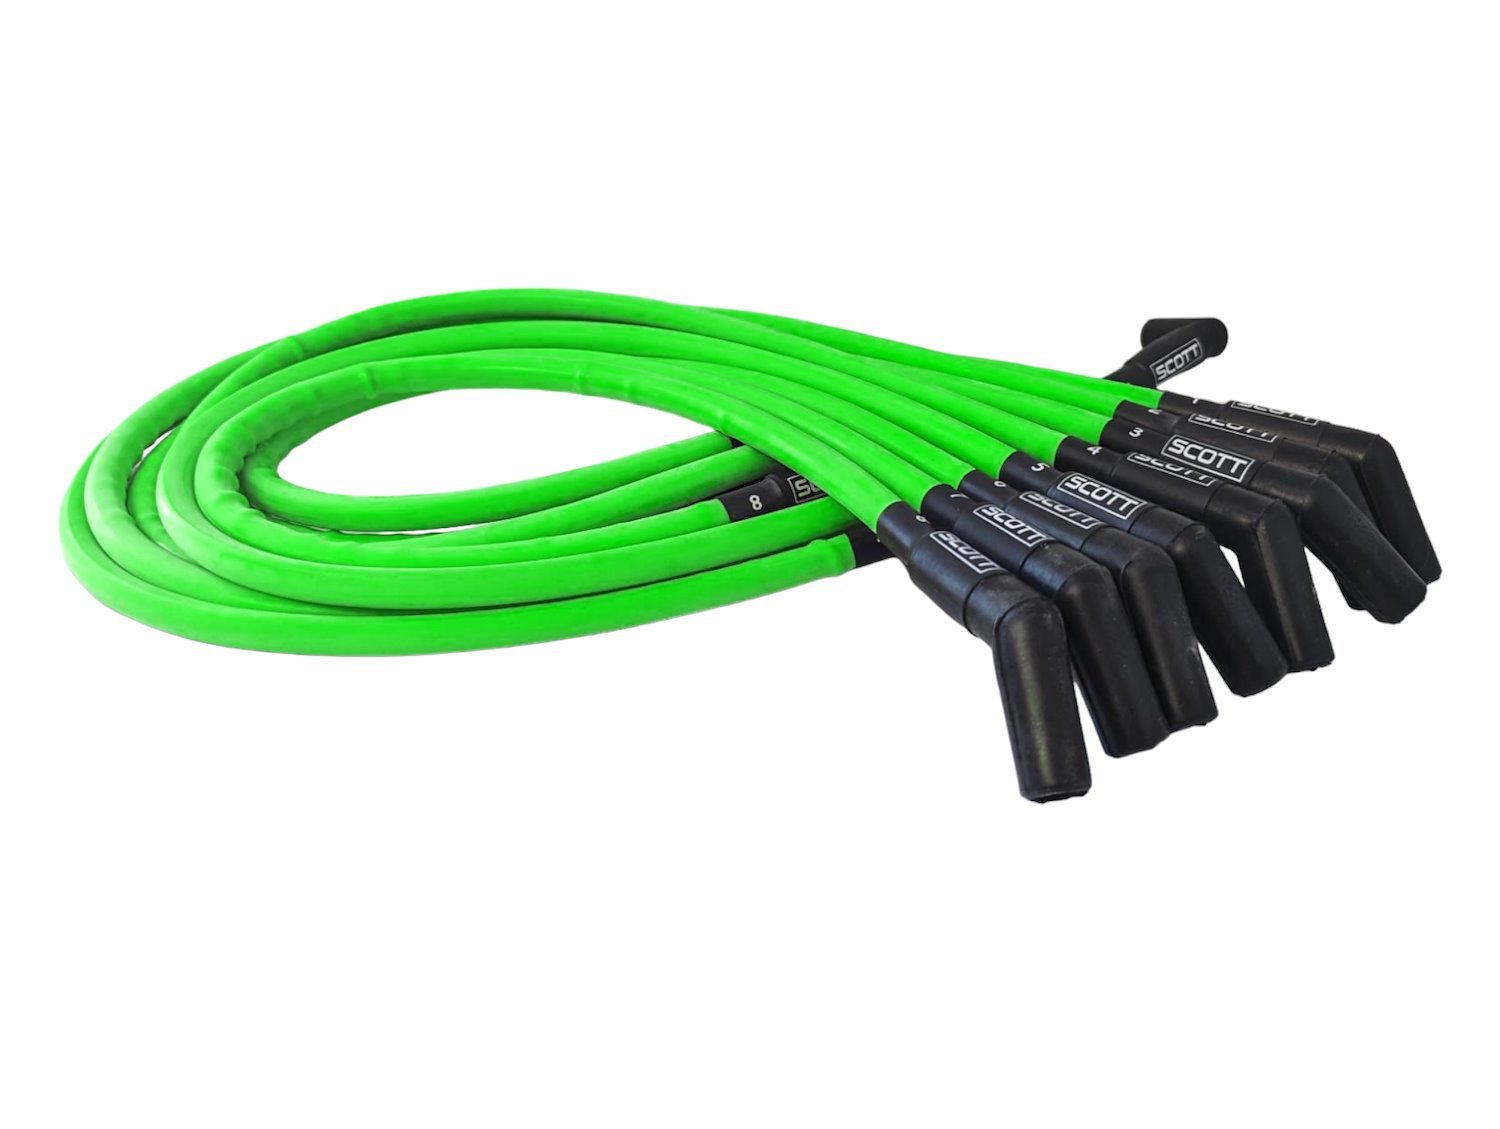 SPW-CH-429-8 High-Performance Silicone-Sleeved Spark Plug Wire Set for Big Block Ford, Over Valve Cover [Fluorescent Green]